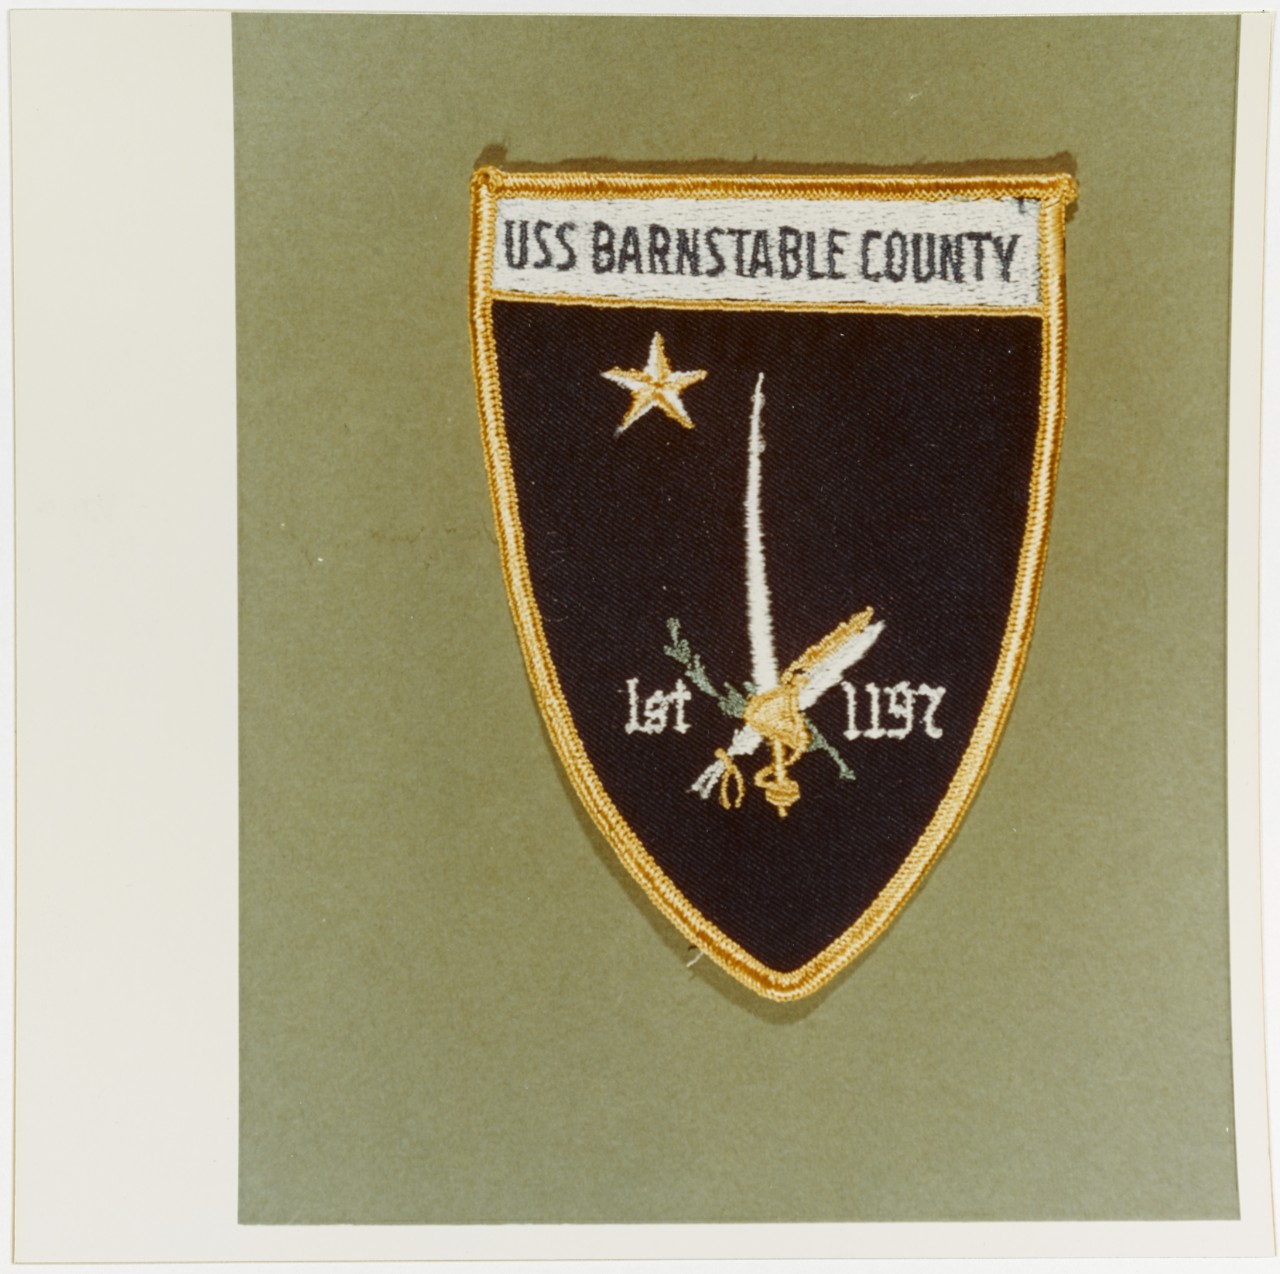 Insignia:  USS BARNSTABLE COUNTY (LST-1197)